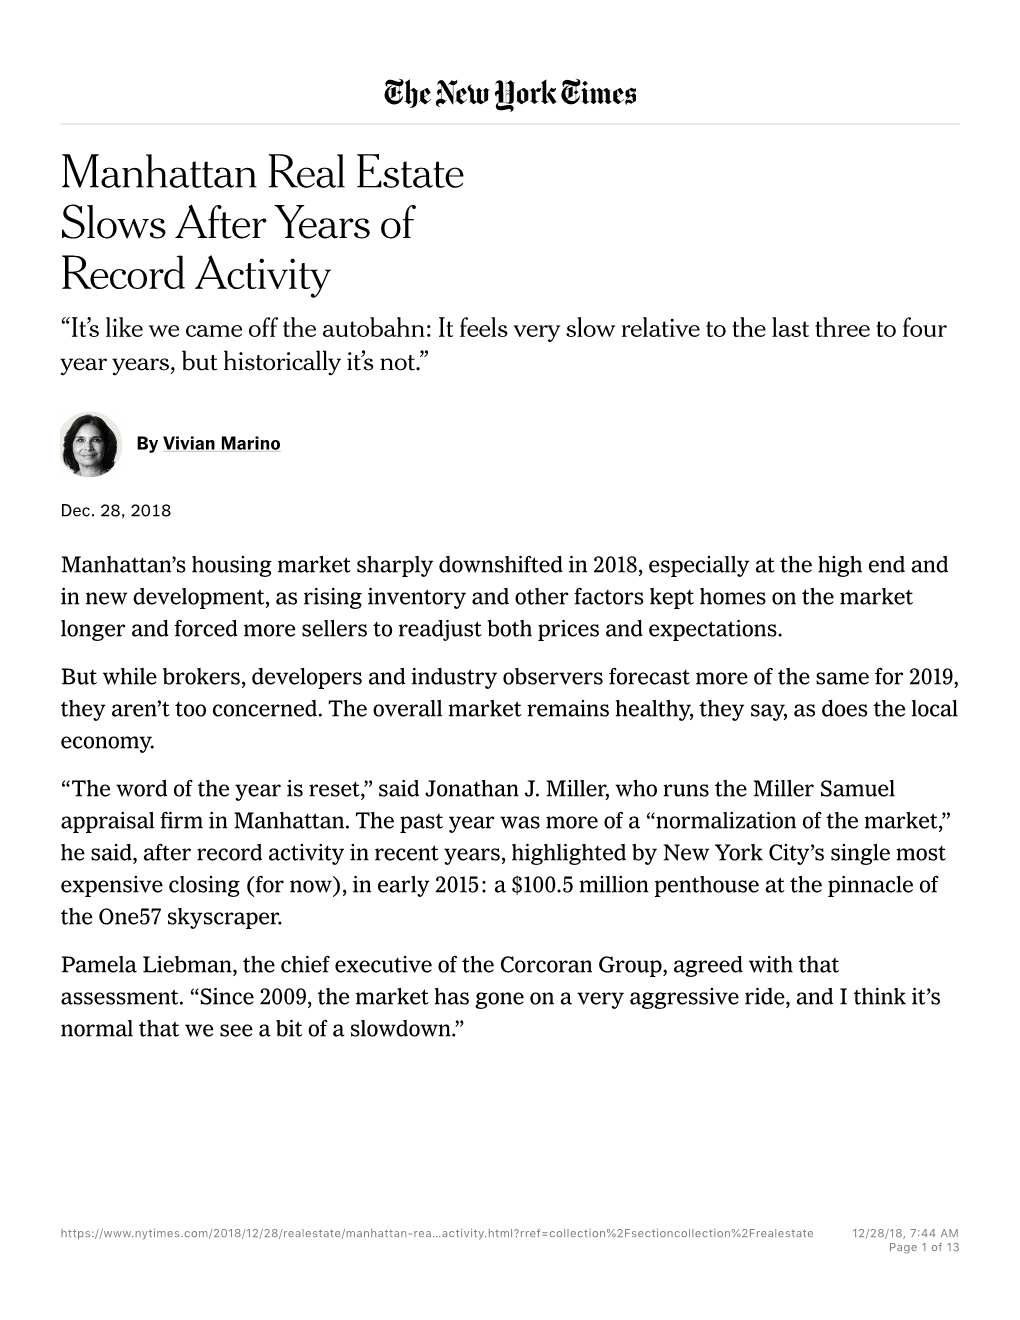 Manhattan Real Estate Slows After Years of Record Activity